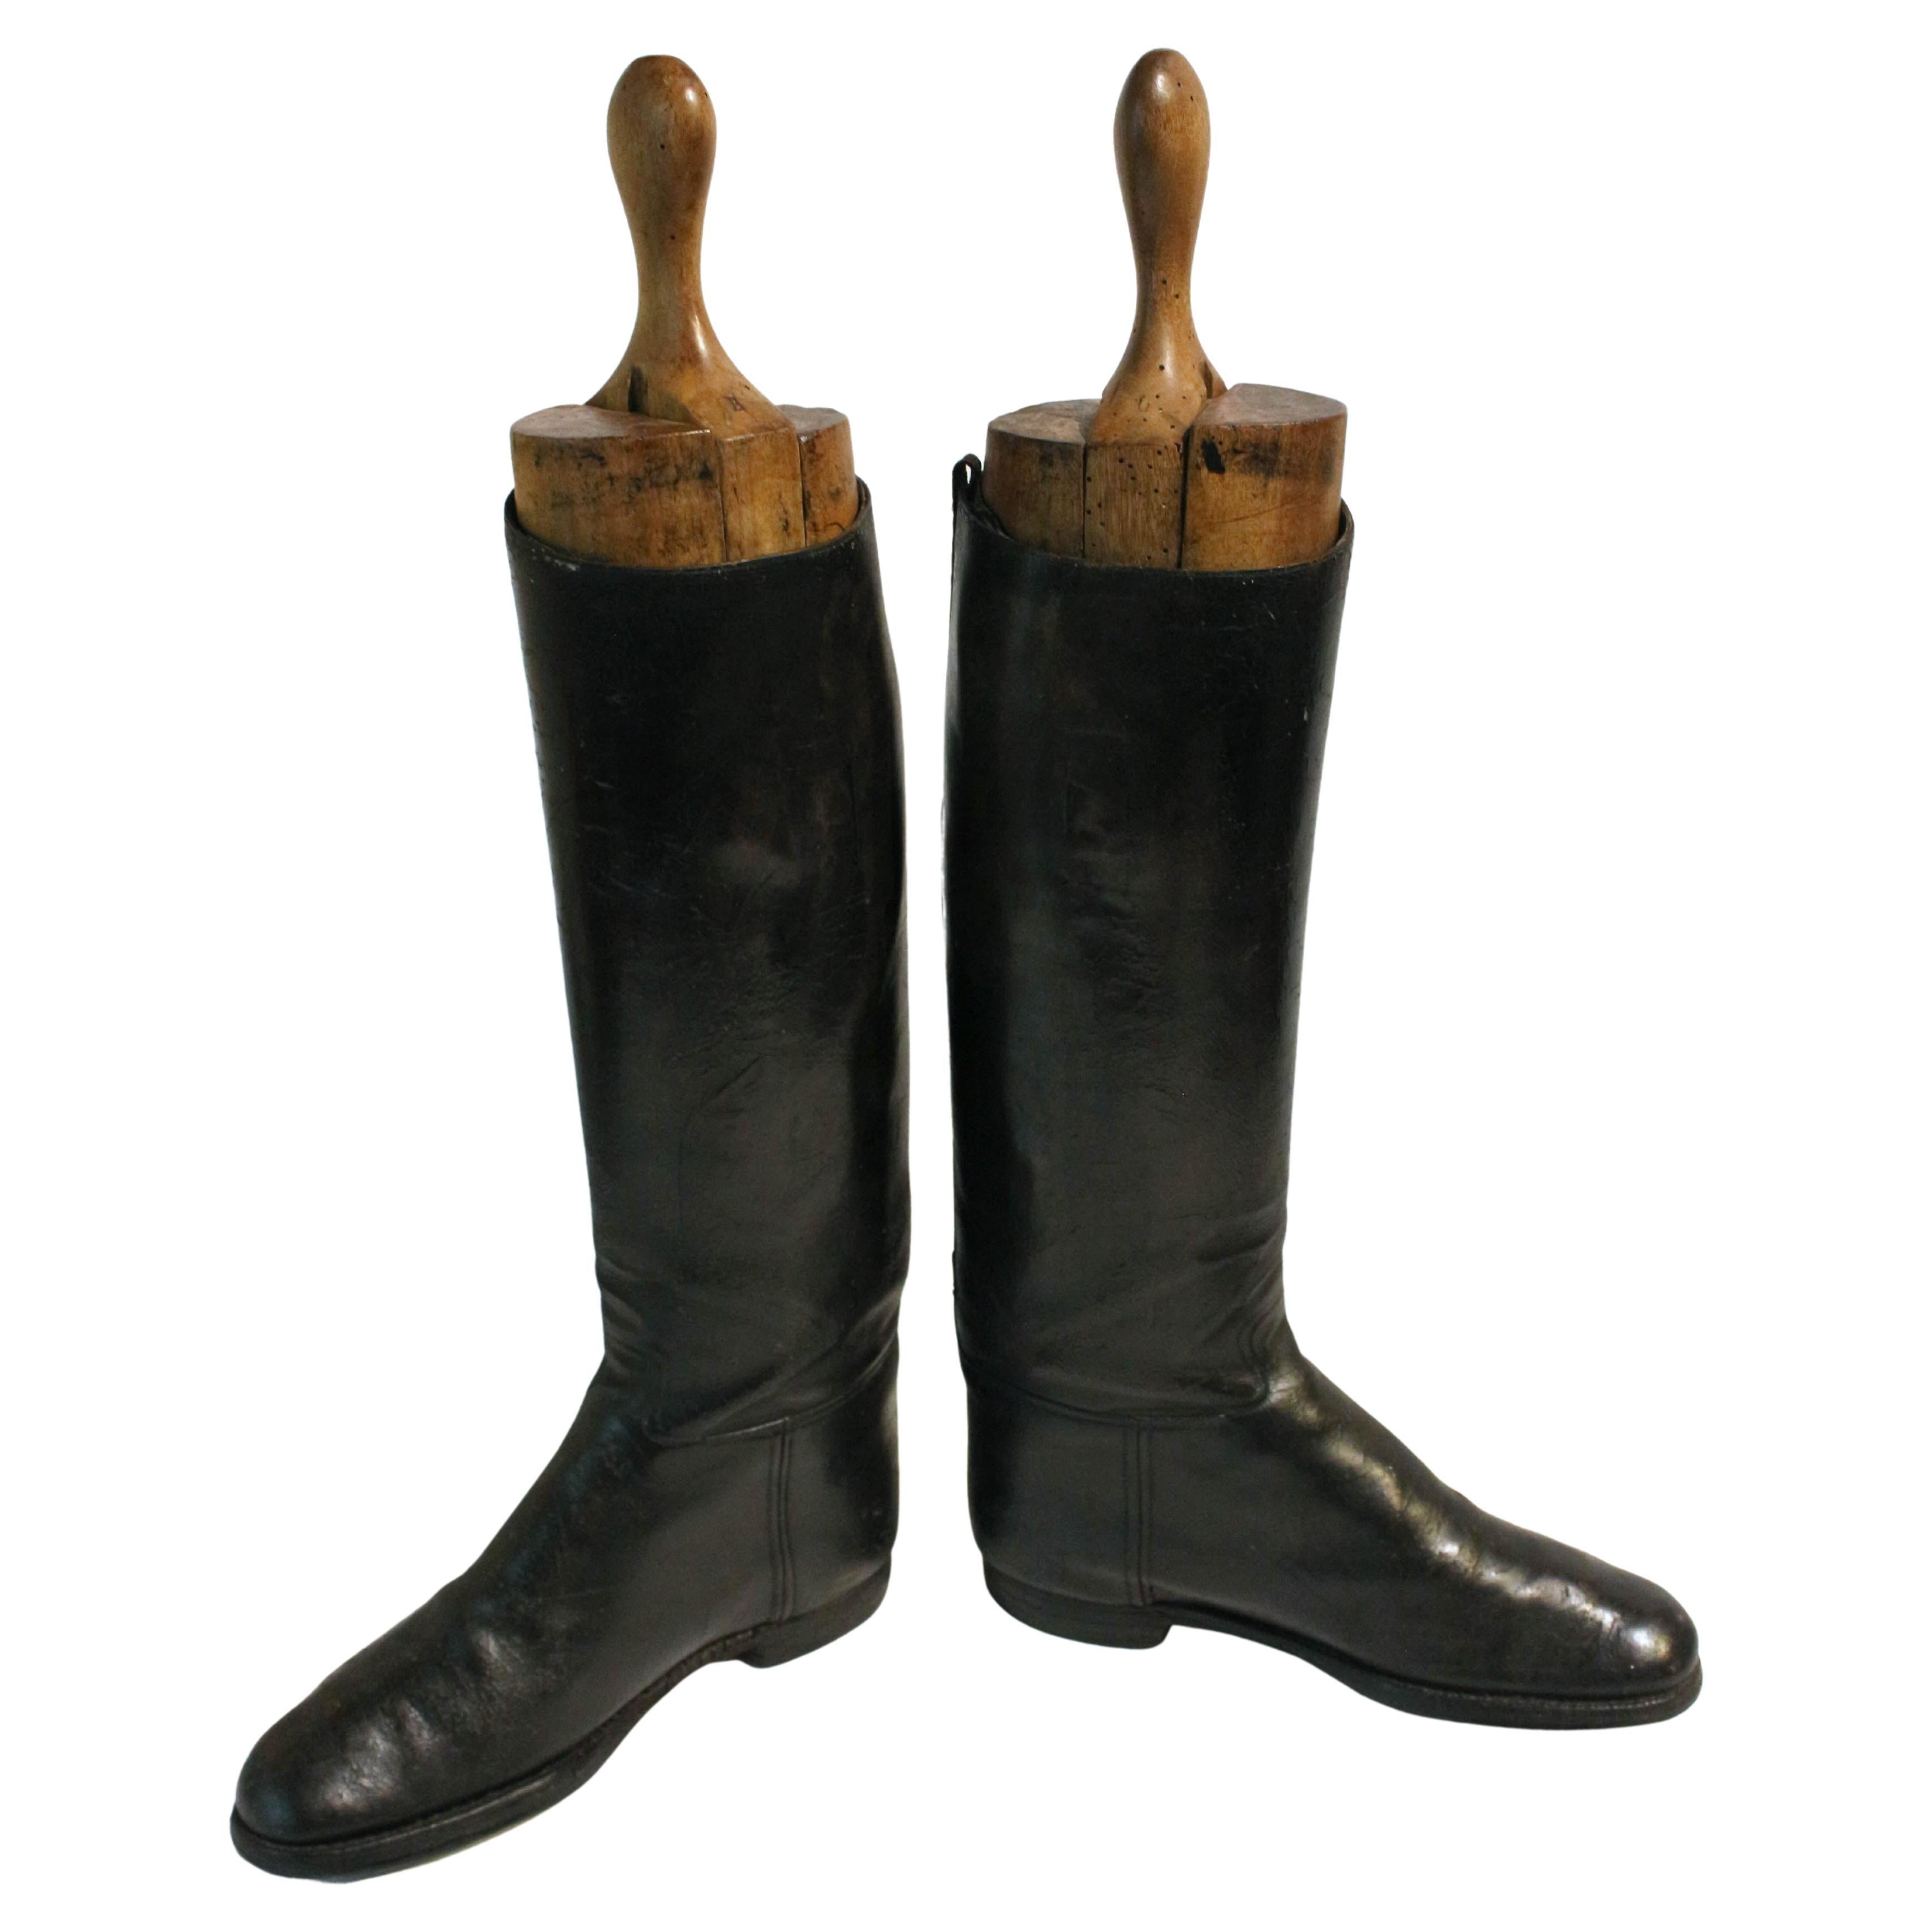 Late 19th-Early 20th Century Pair of English Leather Riding Boots